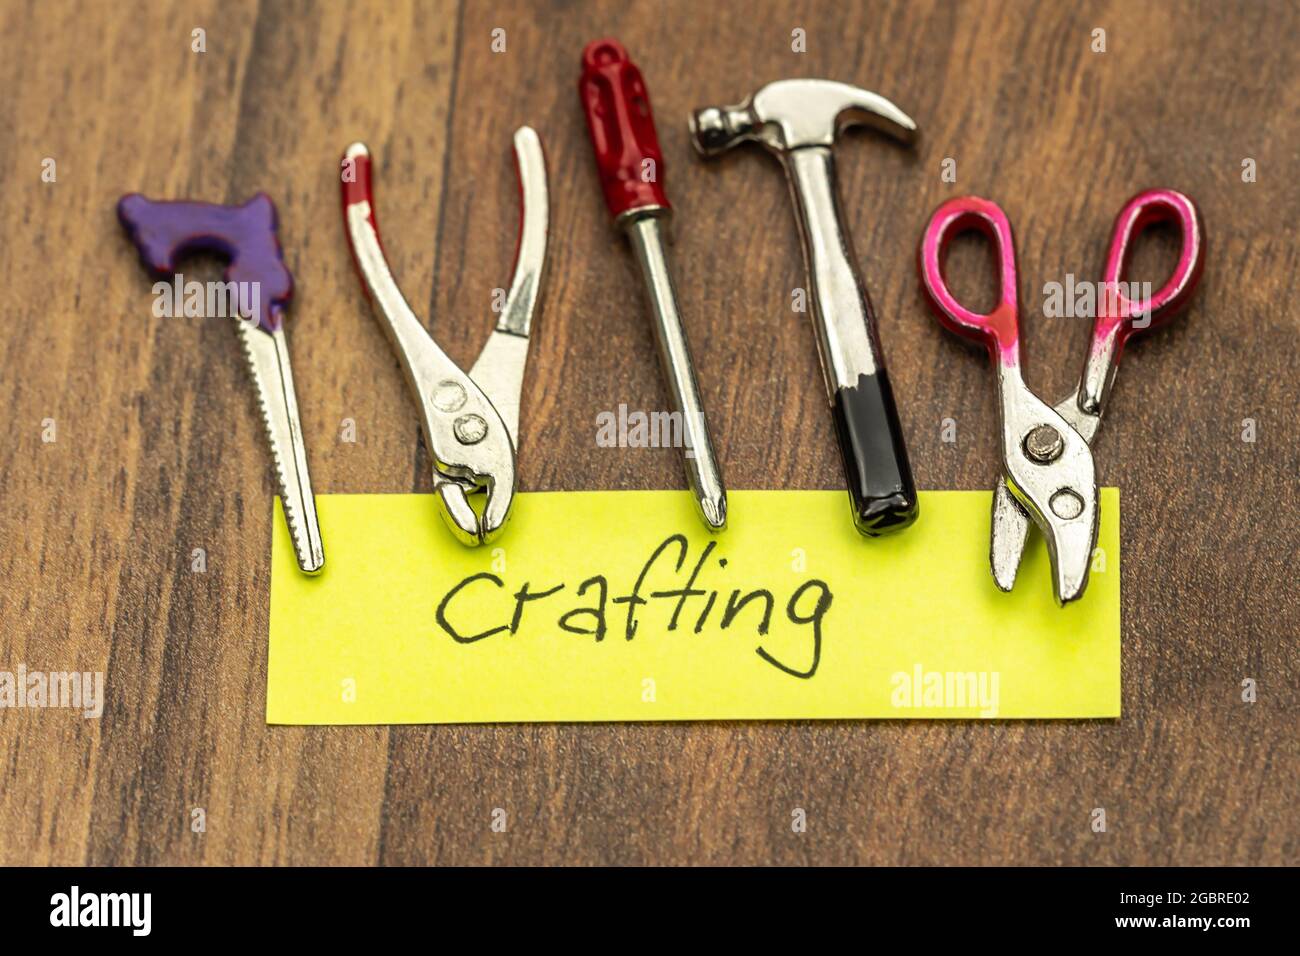 Crafting concept: Handwritten lettering 'crafting' on a sticky note surrounded by miniature crafting tools Stock Photo